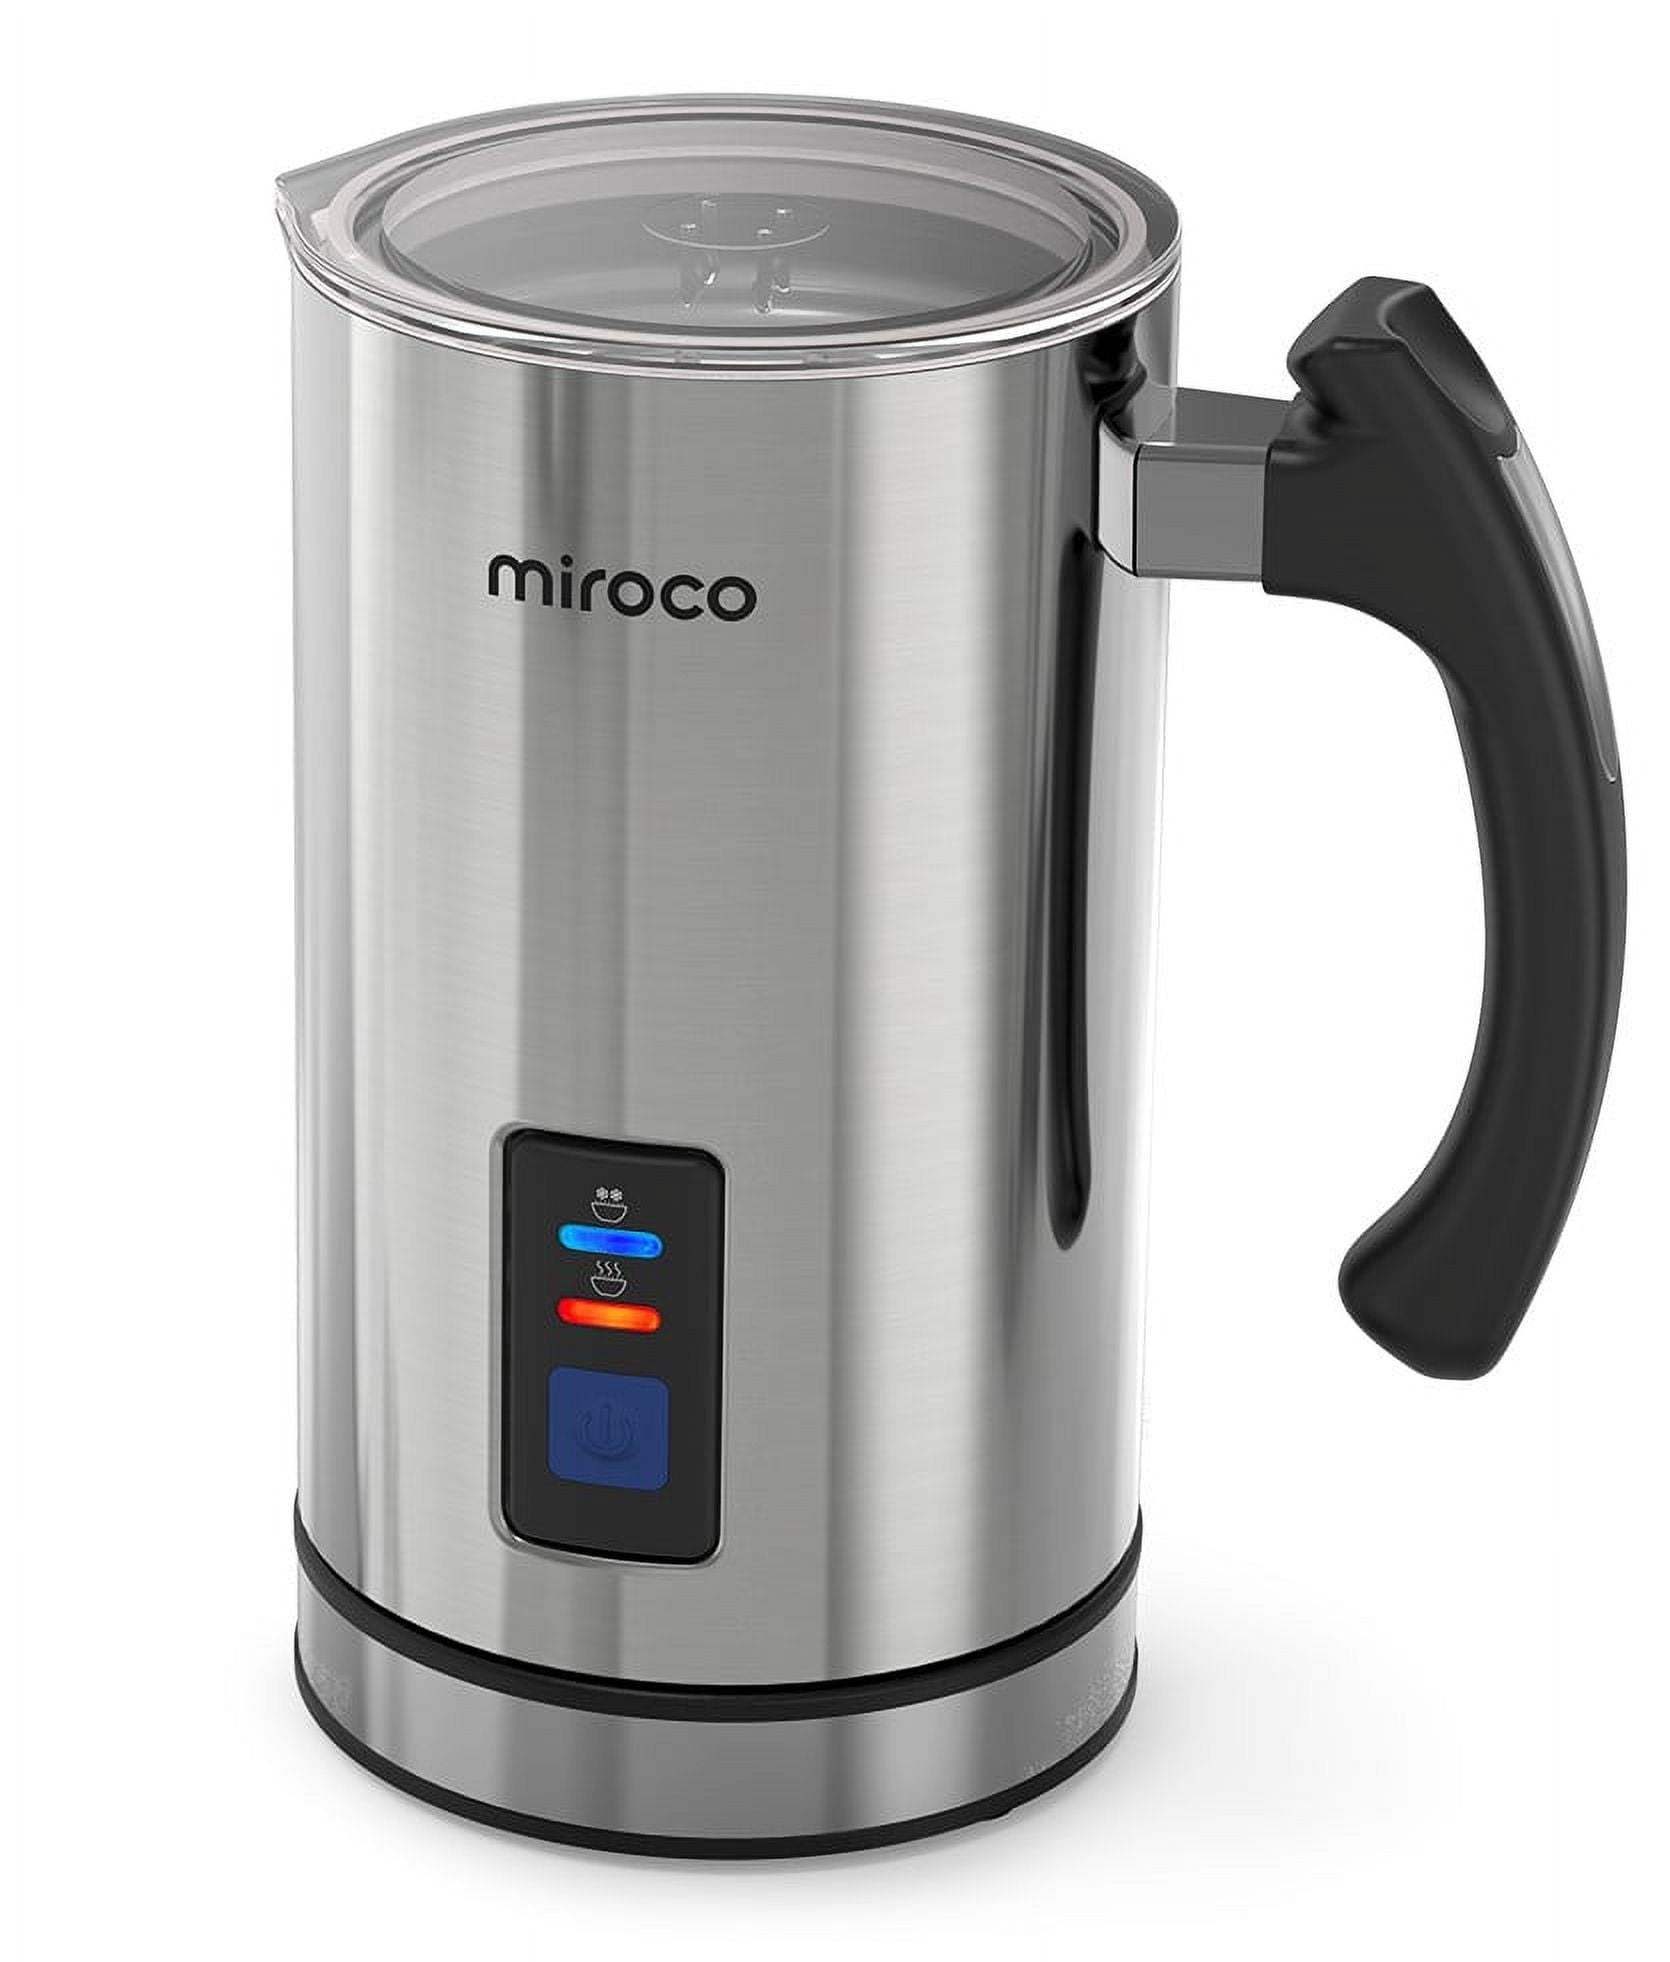 Miroco Milk Frother, Automatic Hot and Cold Electric Milk Steamer Foam Maker 8oz for Coffee, Latte, Cappuccino, Black, Size: 3.94 x 3.94 x 7.52